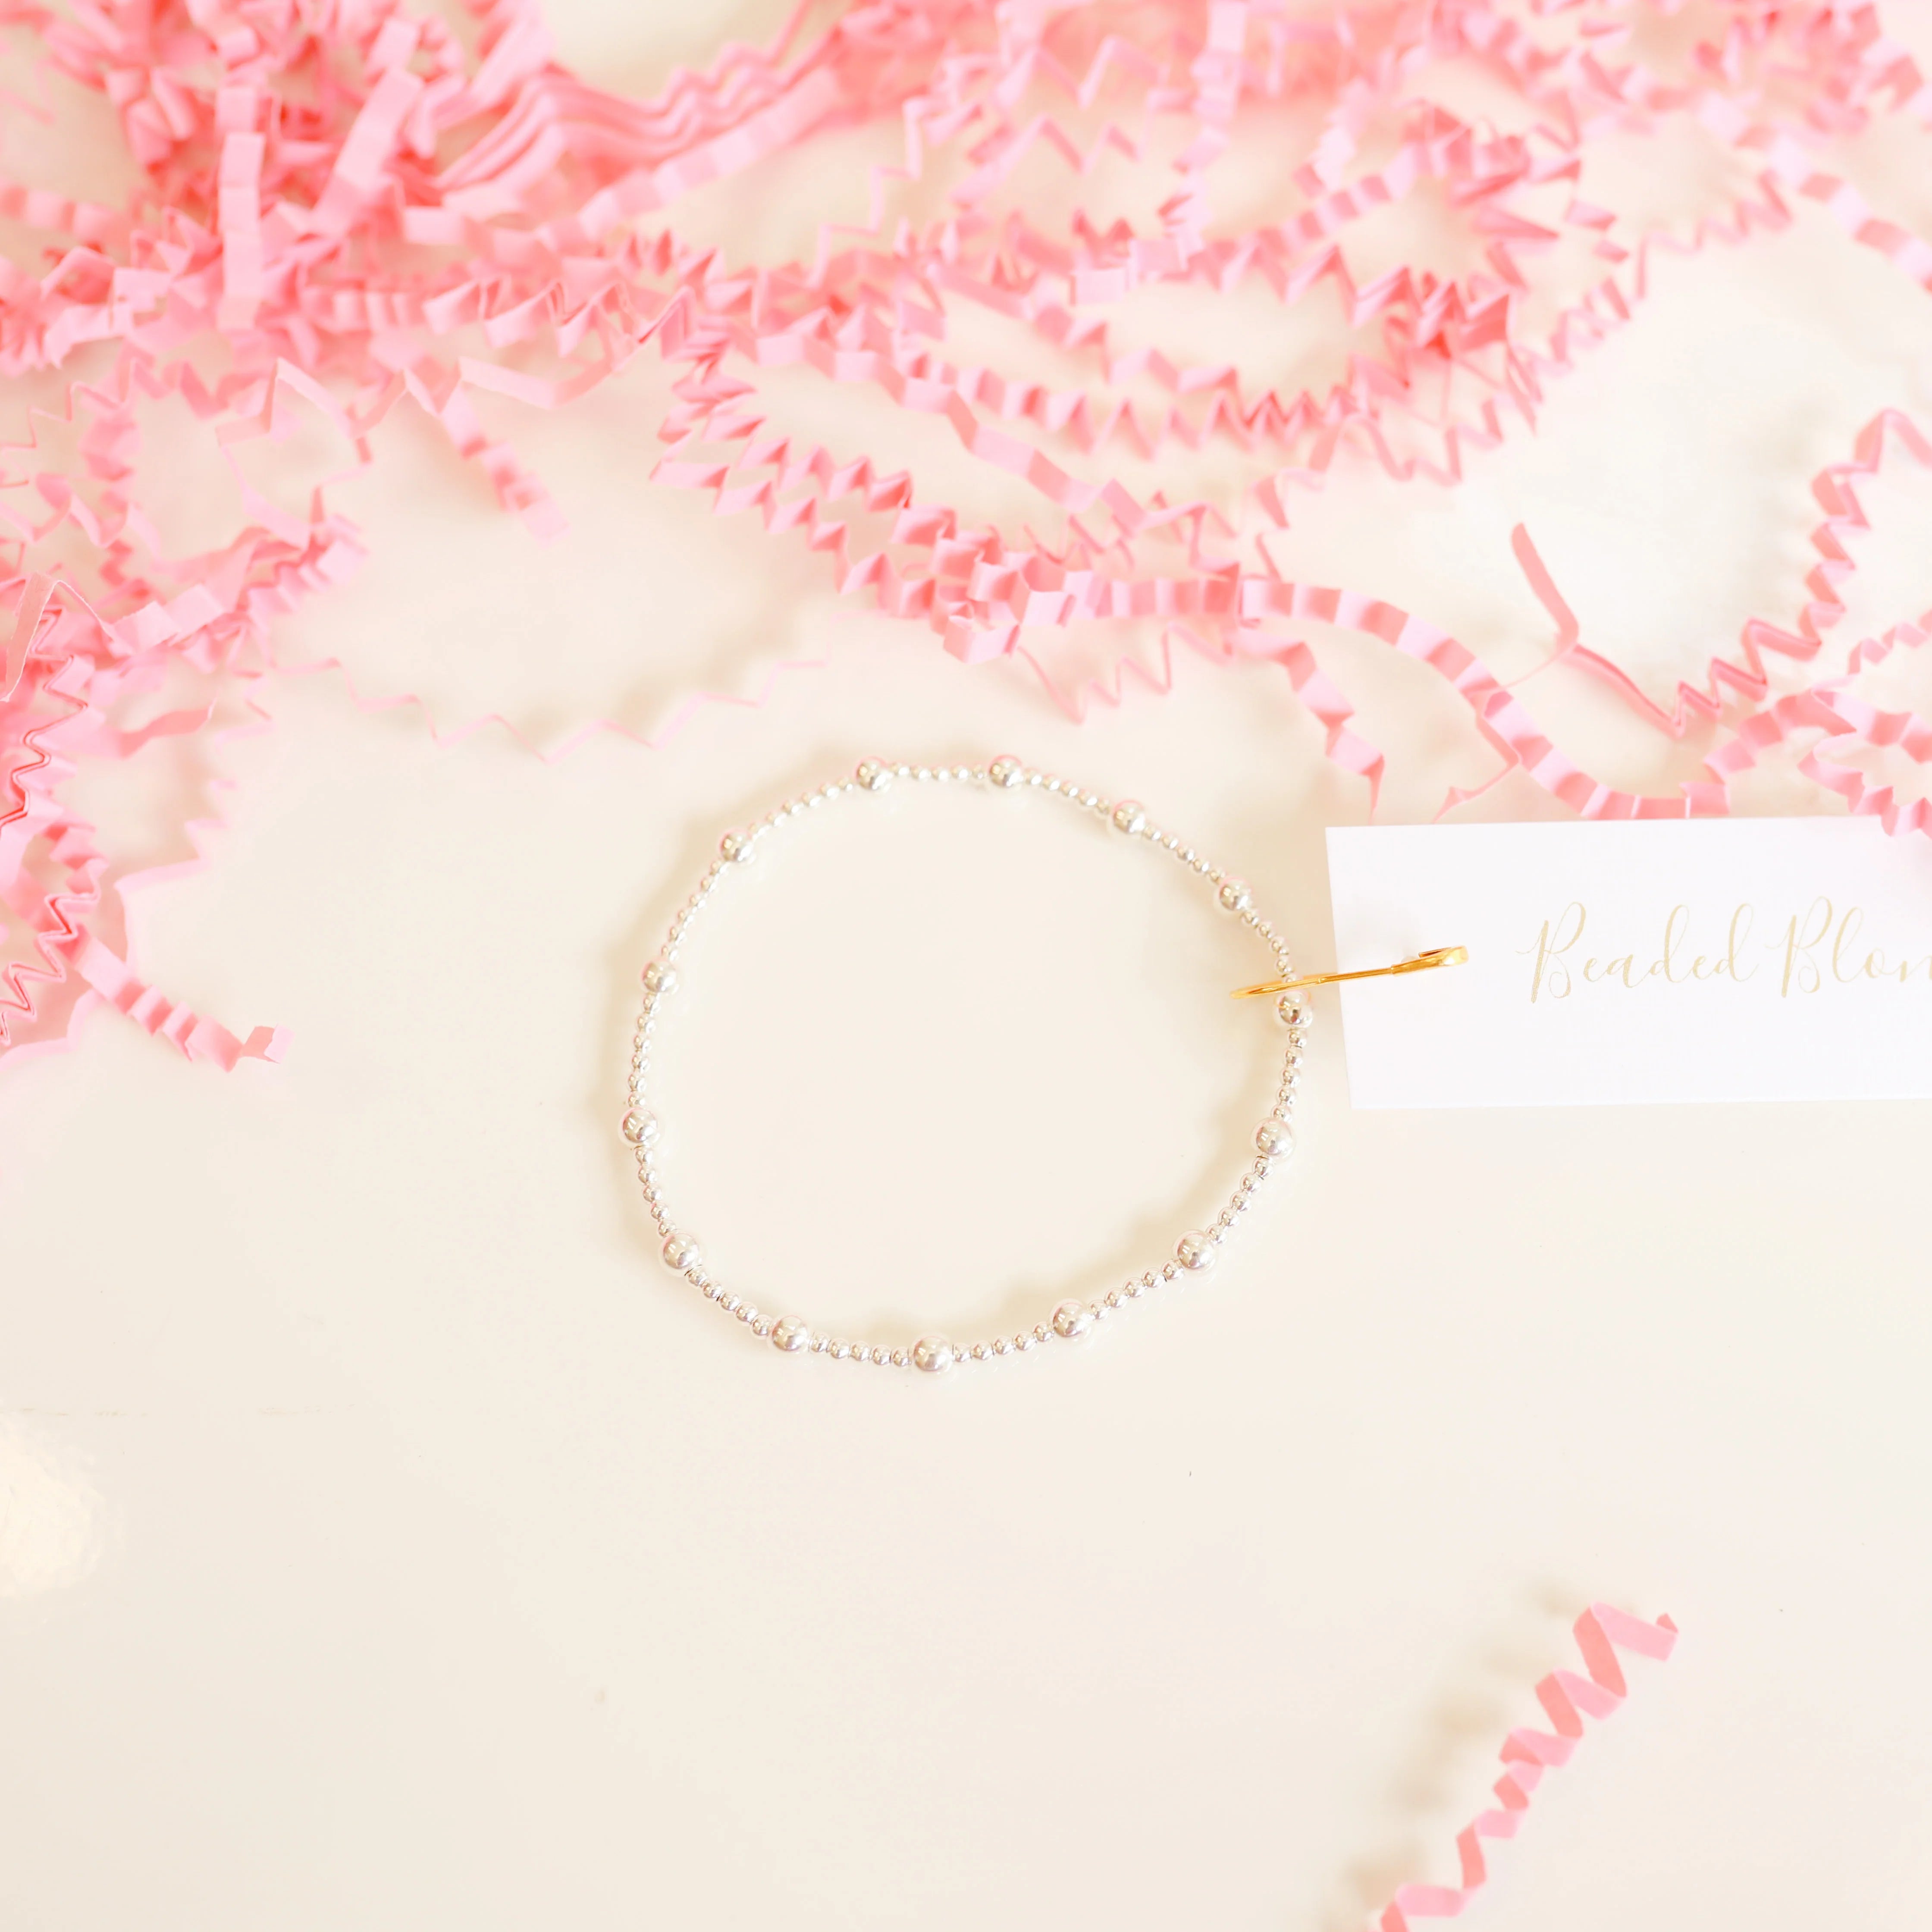 Beaded Blondes | June Bracelet in Silver - Giddy Up Glamour Boutique